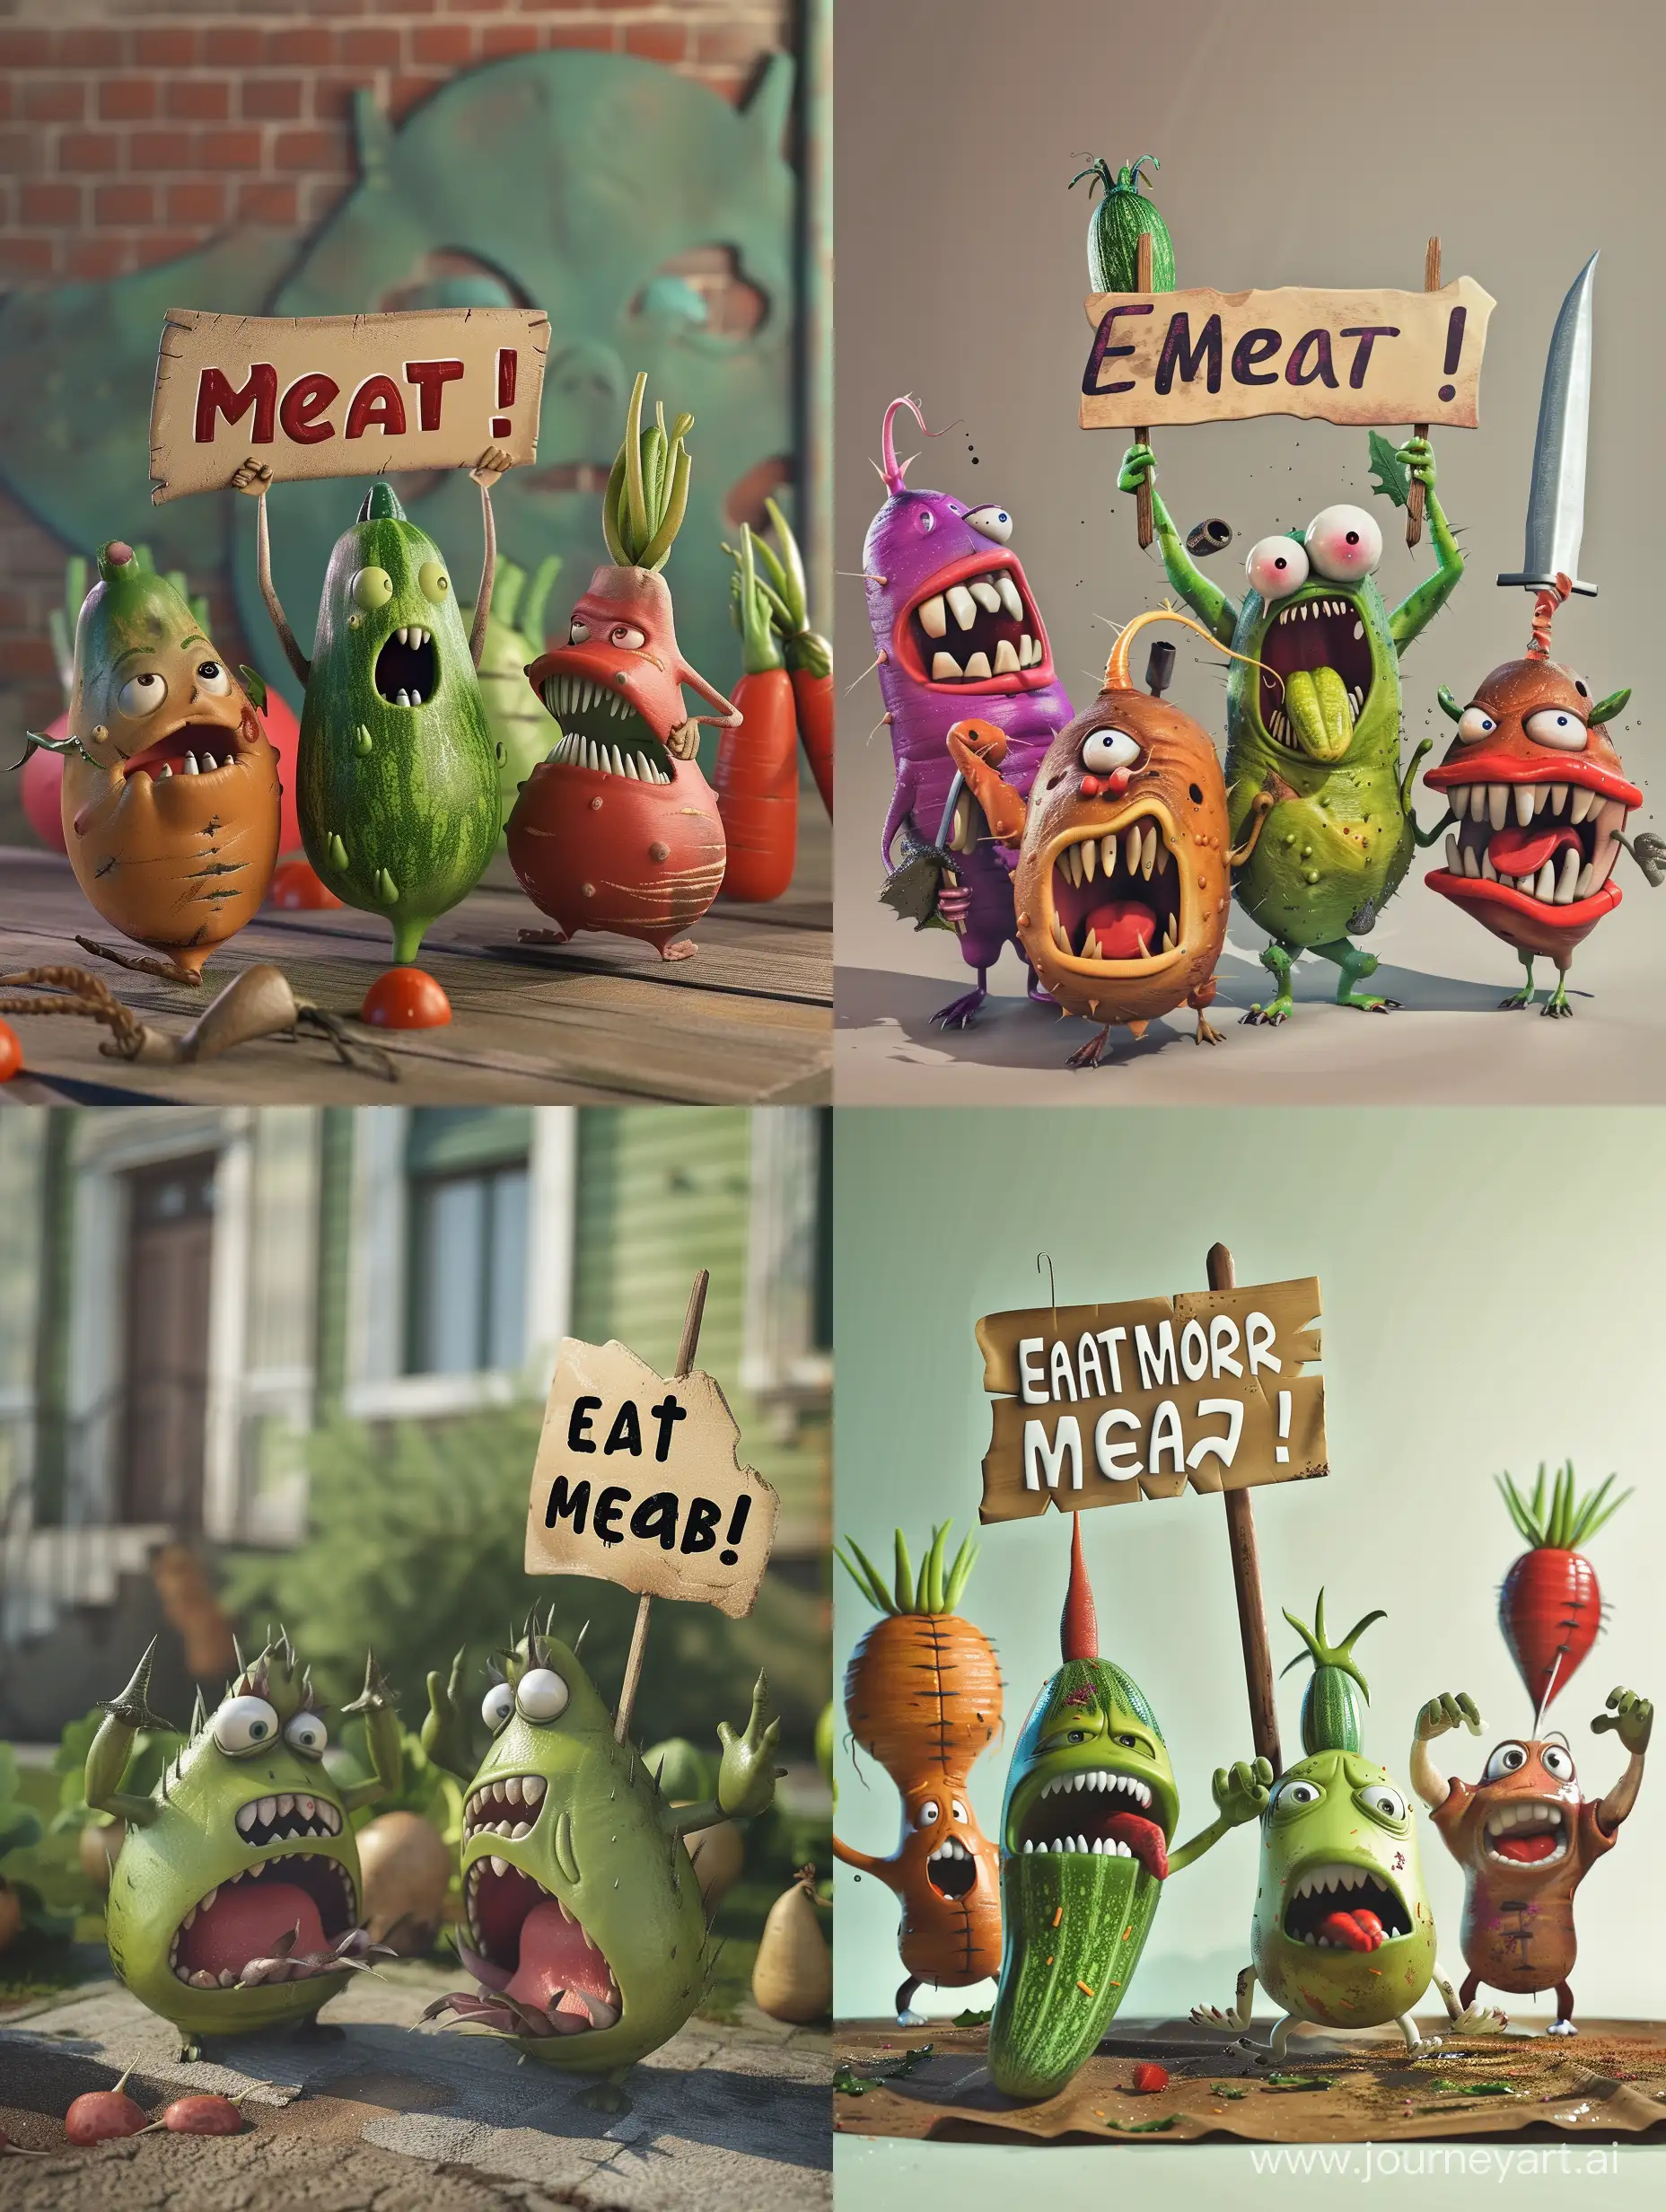 Animated-Protest-Angry-Vegetables-Advocate-for-Meat-Consumption